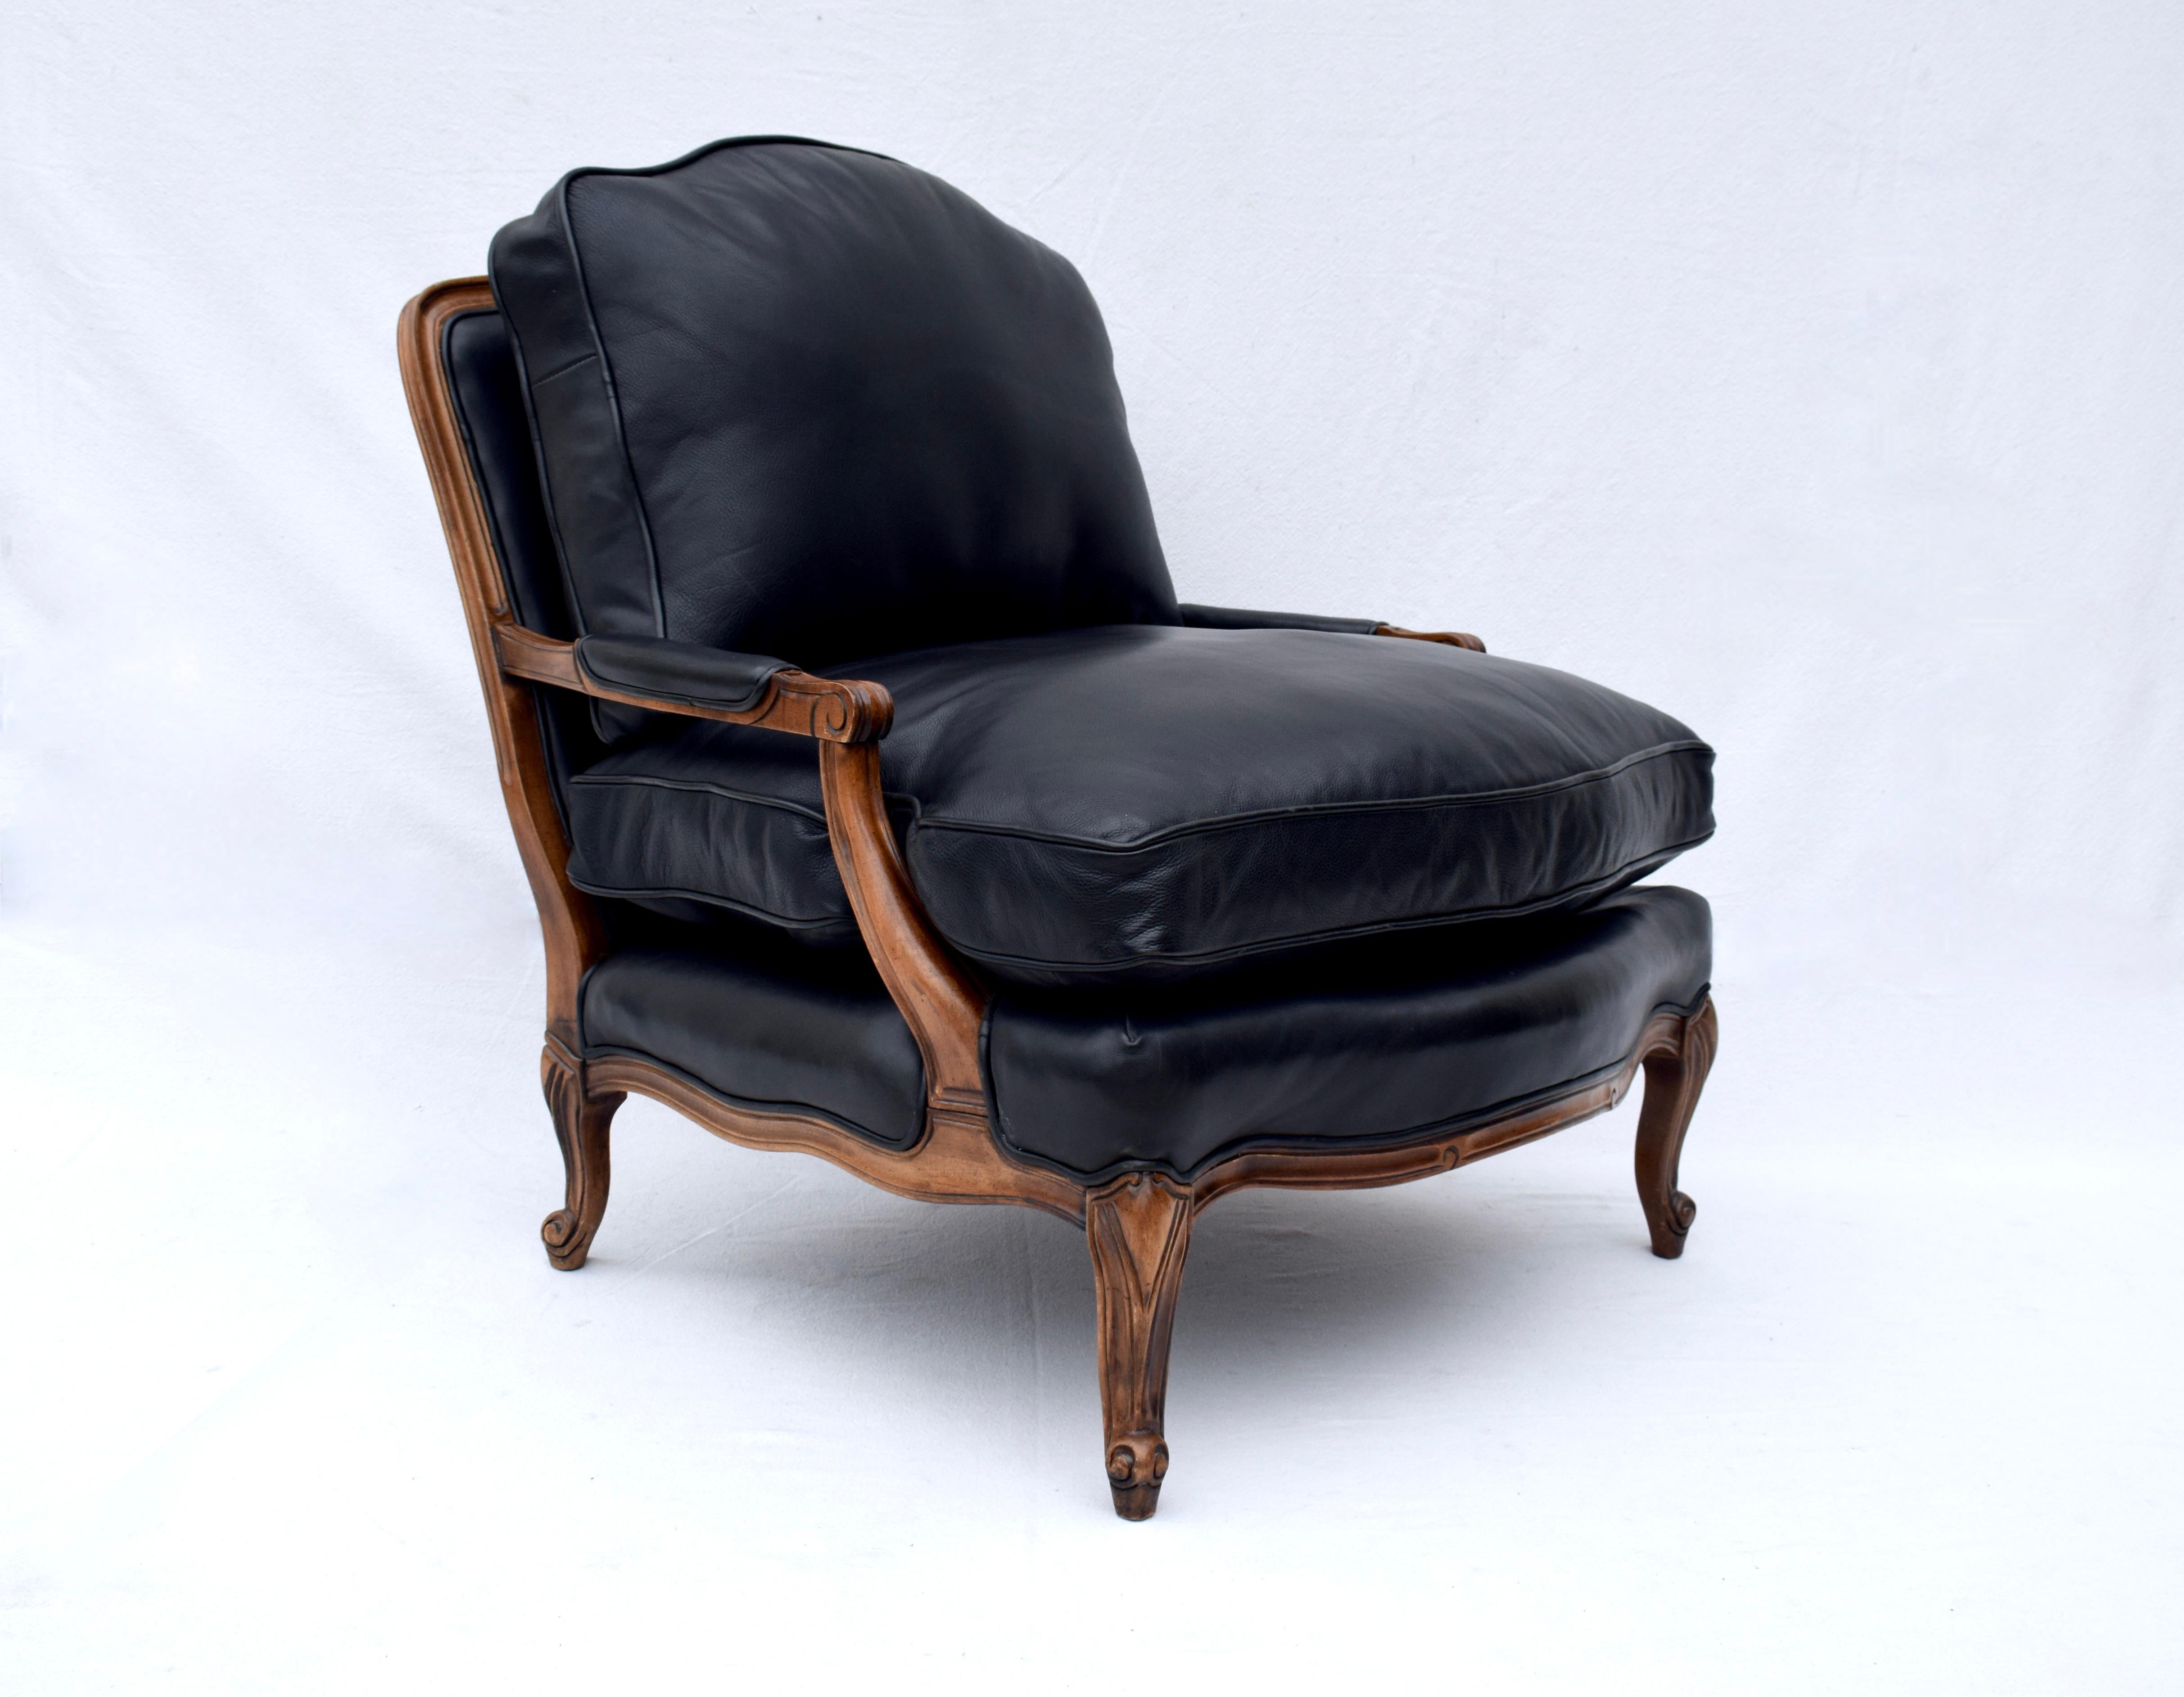 French Provincial Woodward & Lothrop Top of the Line Black Leather and Walnut Club Chair & Ottoman